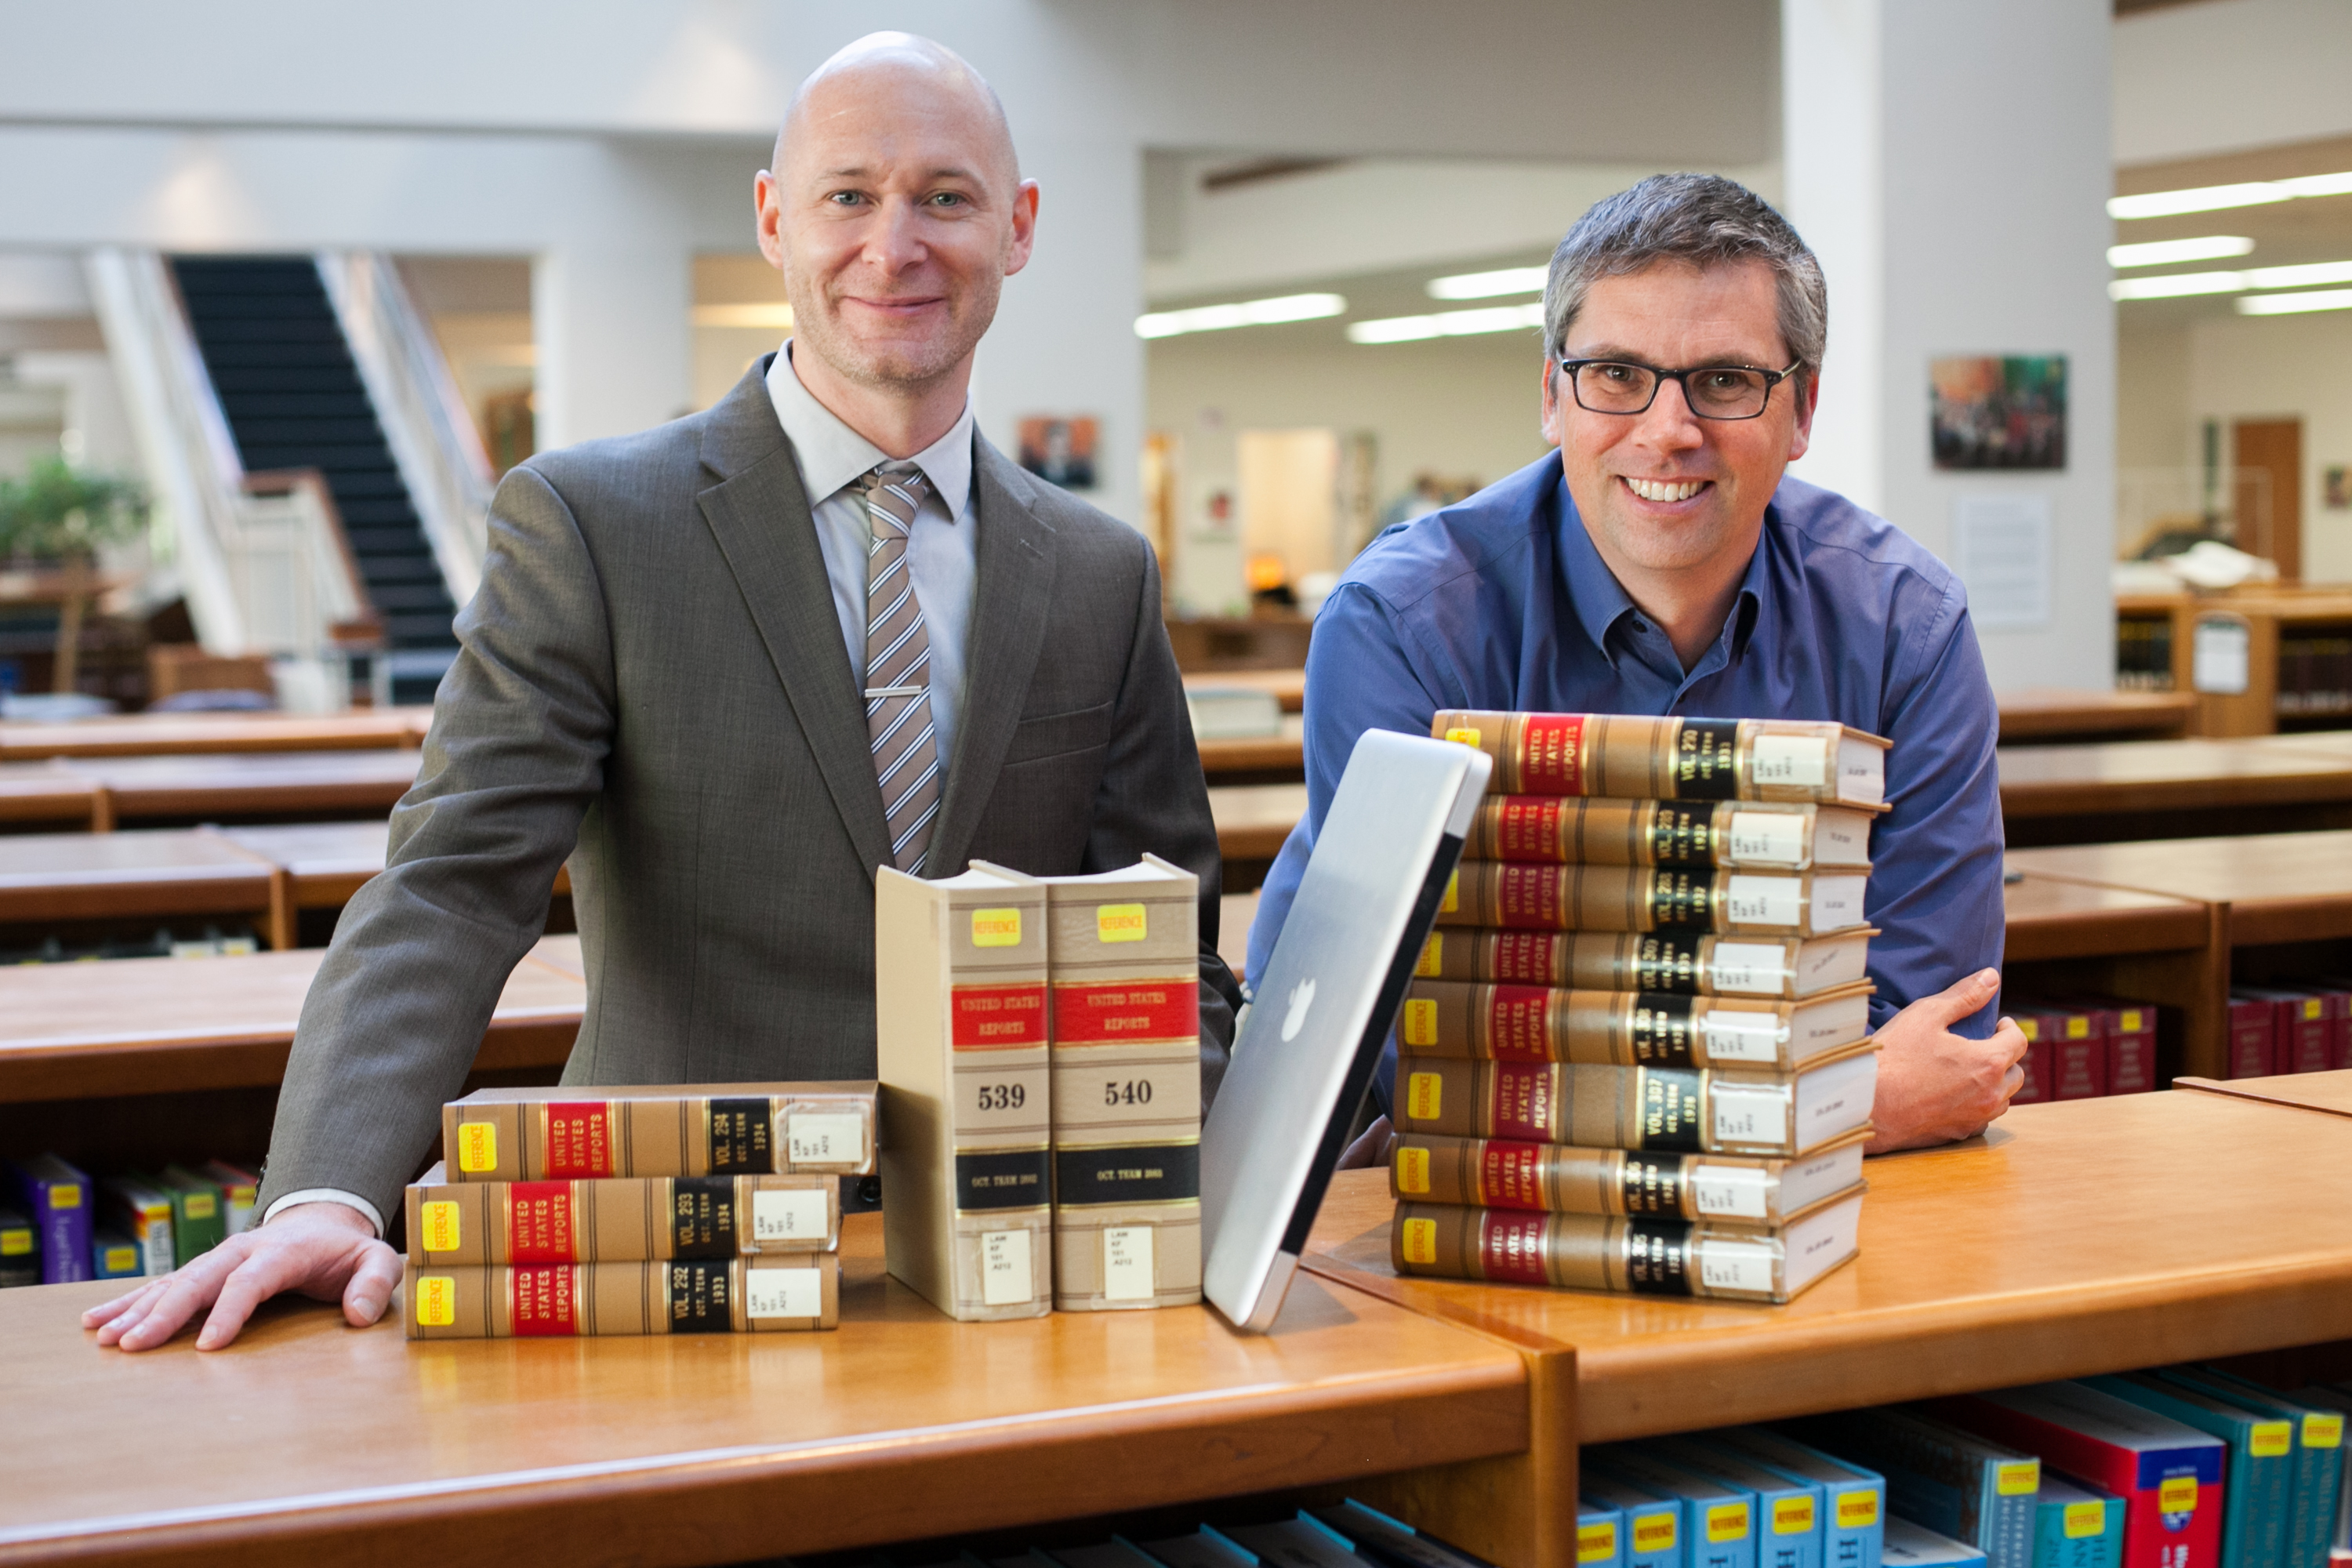 Michael Livermore, left, and Jon Ashley, stand with a stack of books and a computer